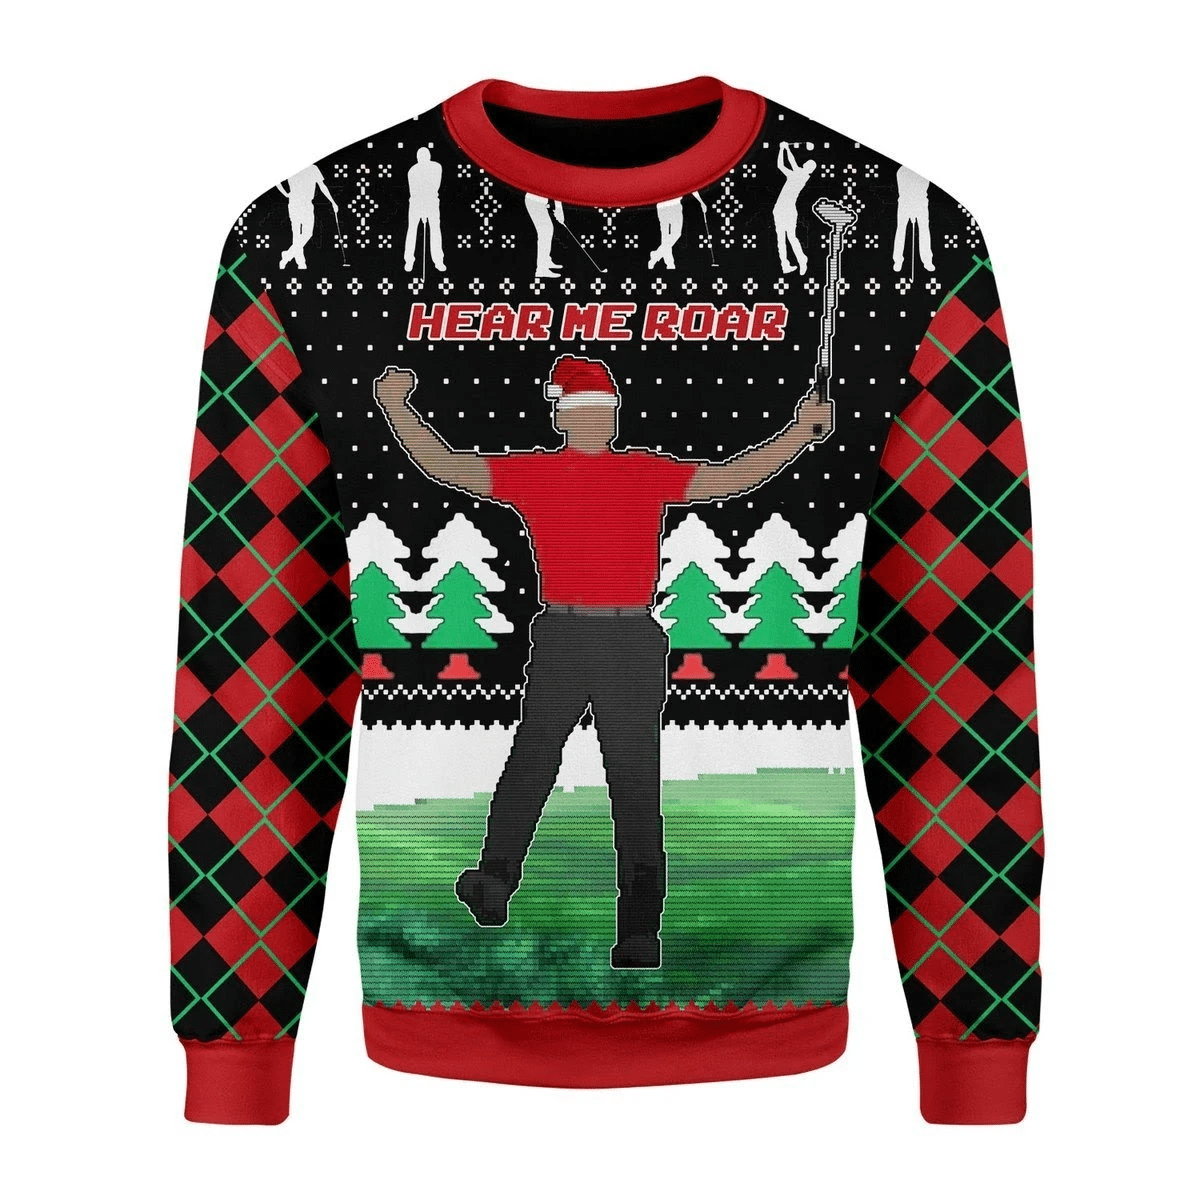 Here Him Roar Ugly Christmas Sweater   1636